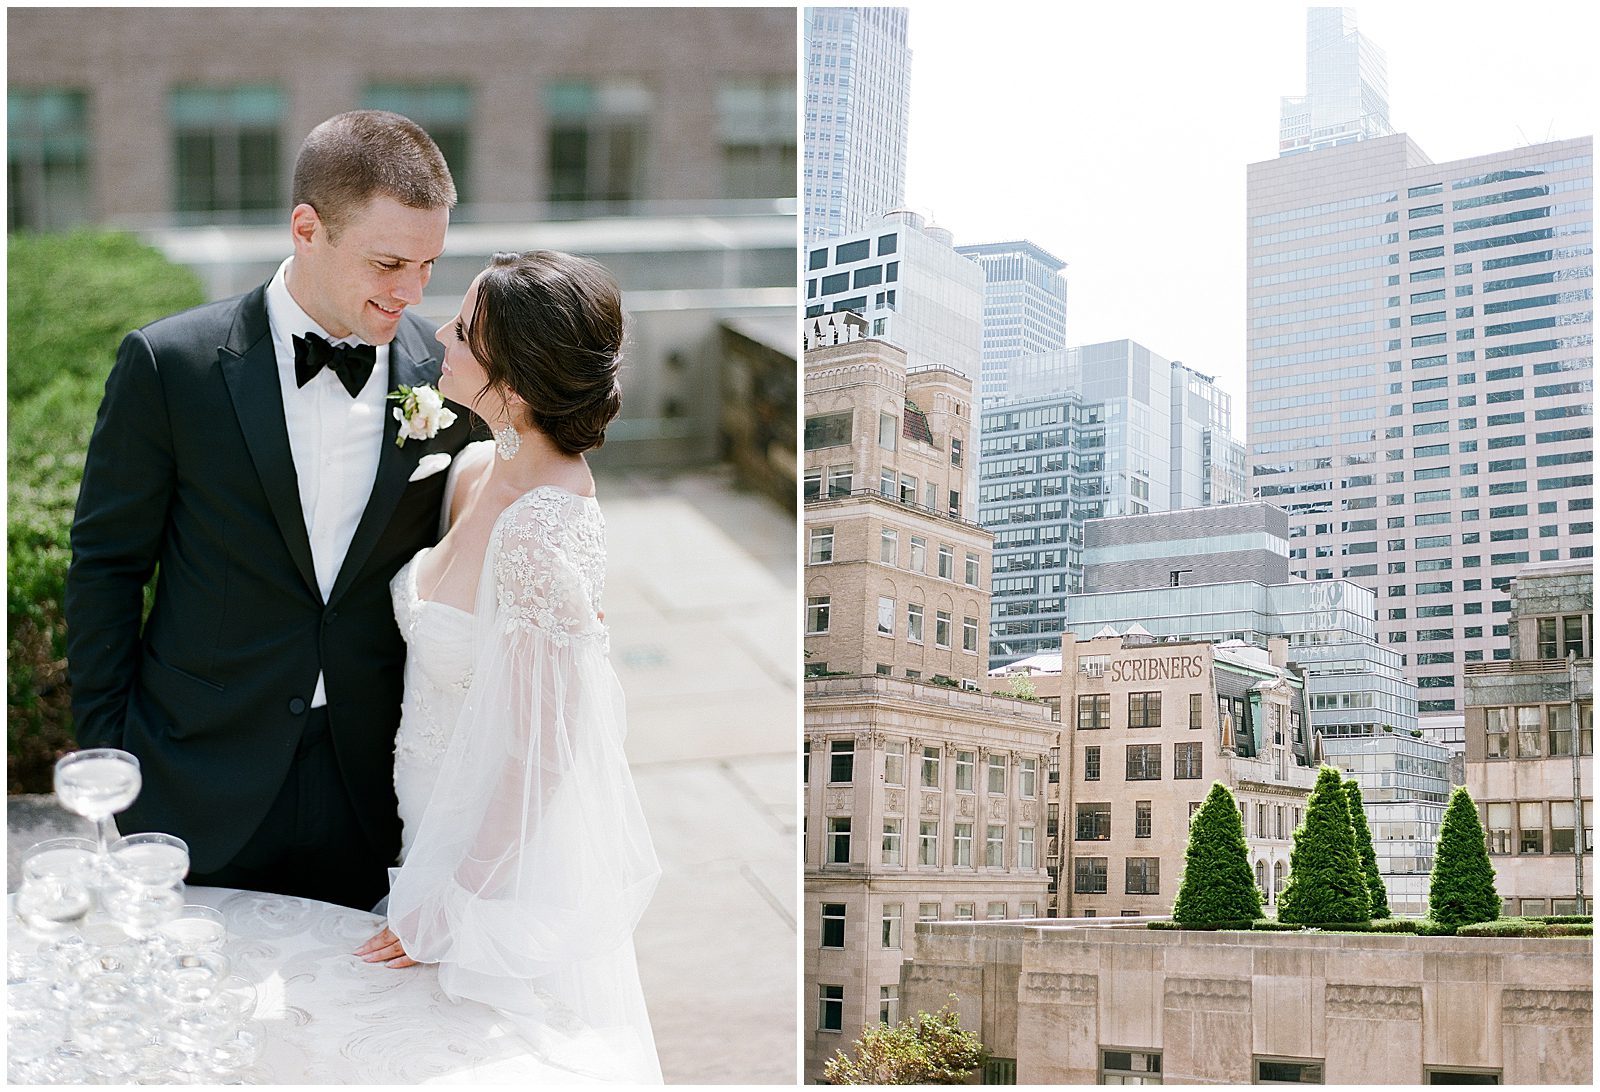 Bride and Groom at Champagne Tower and New York City View Photos